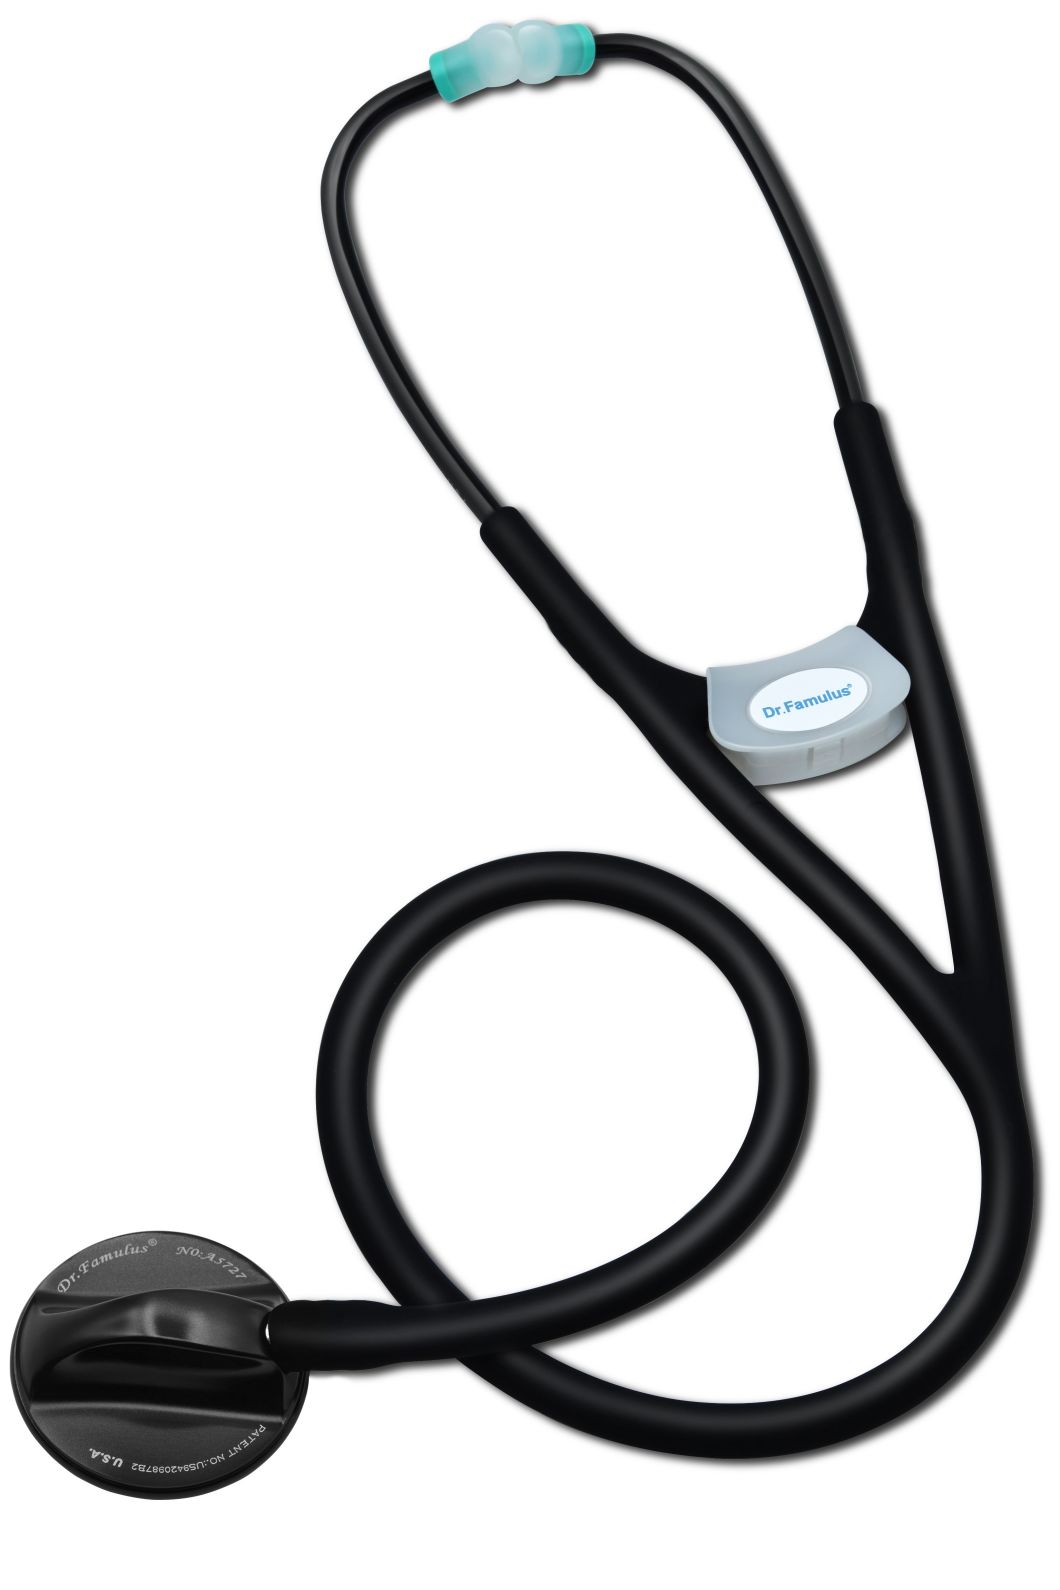 Single Frequency Preset Stethoscope with Single Head